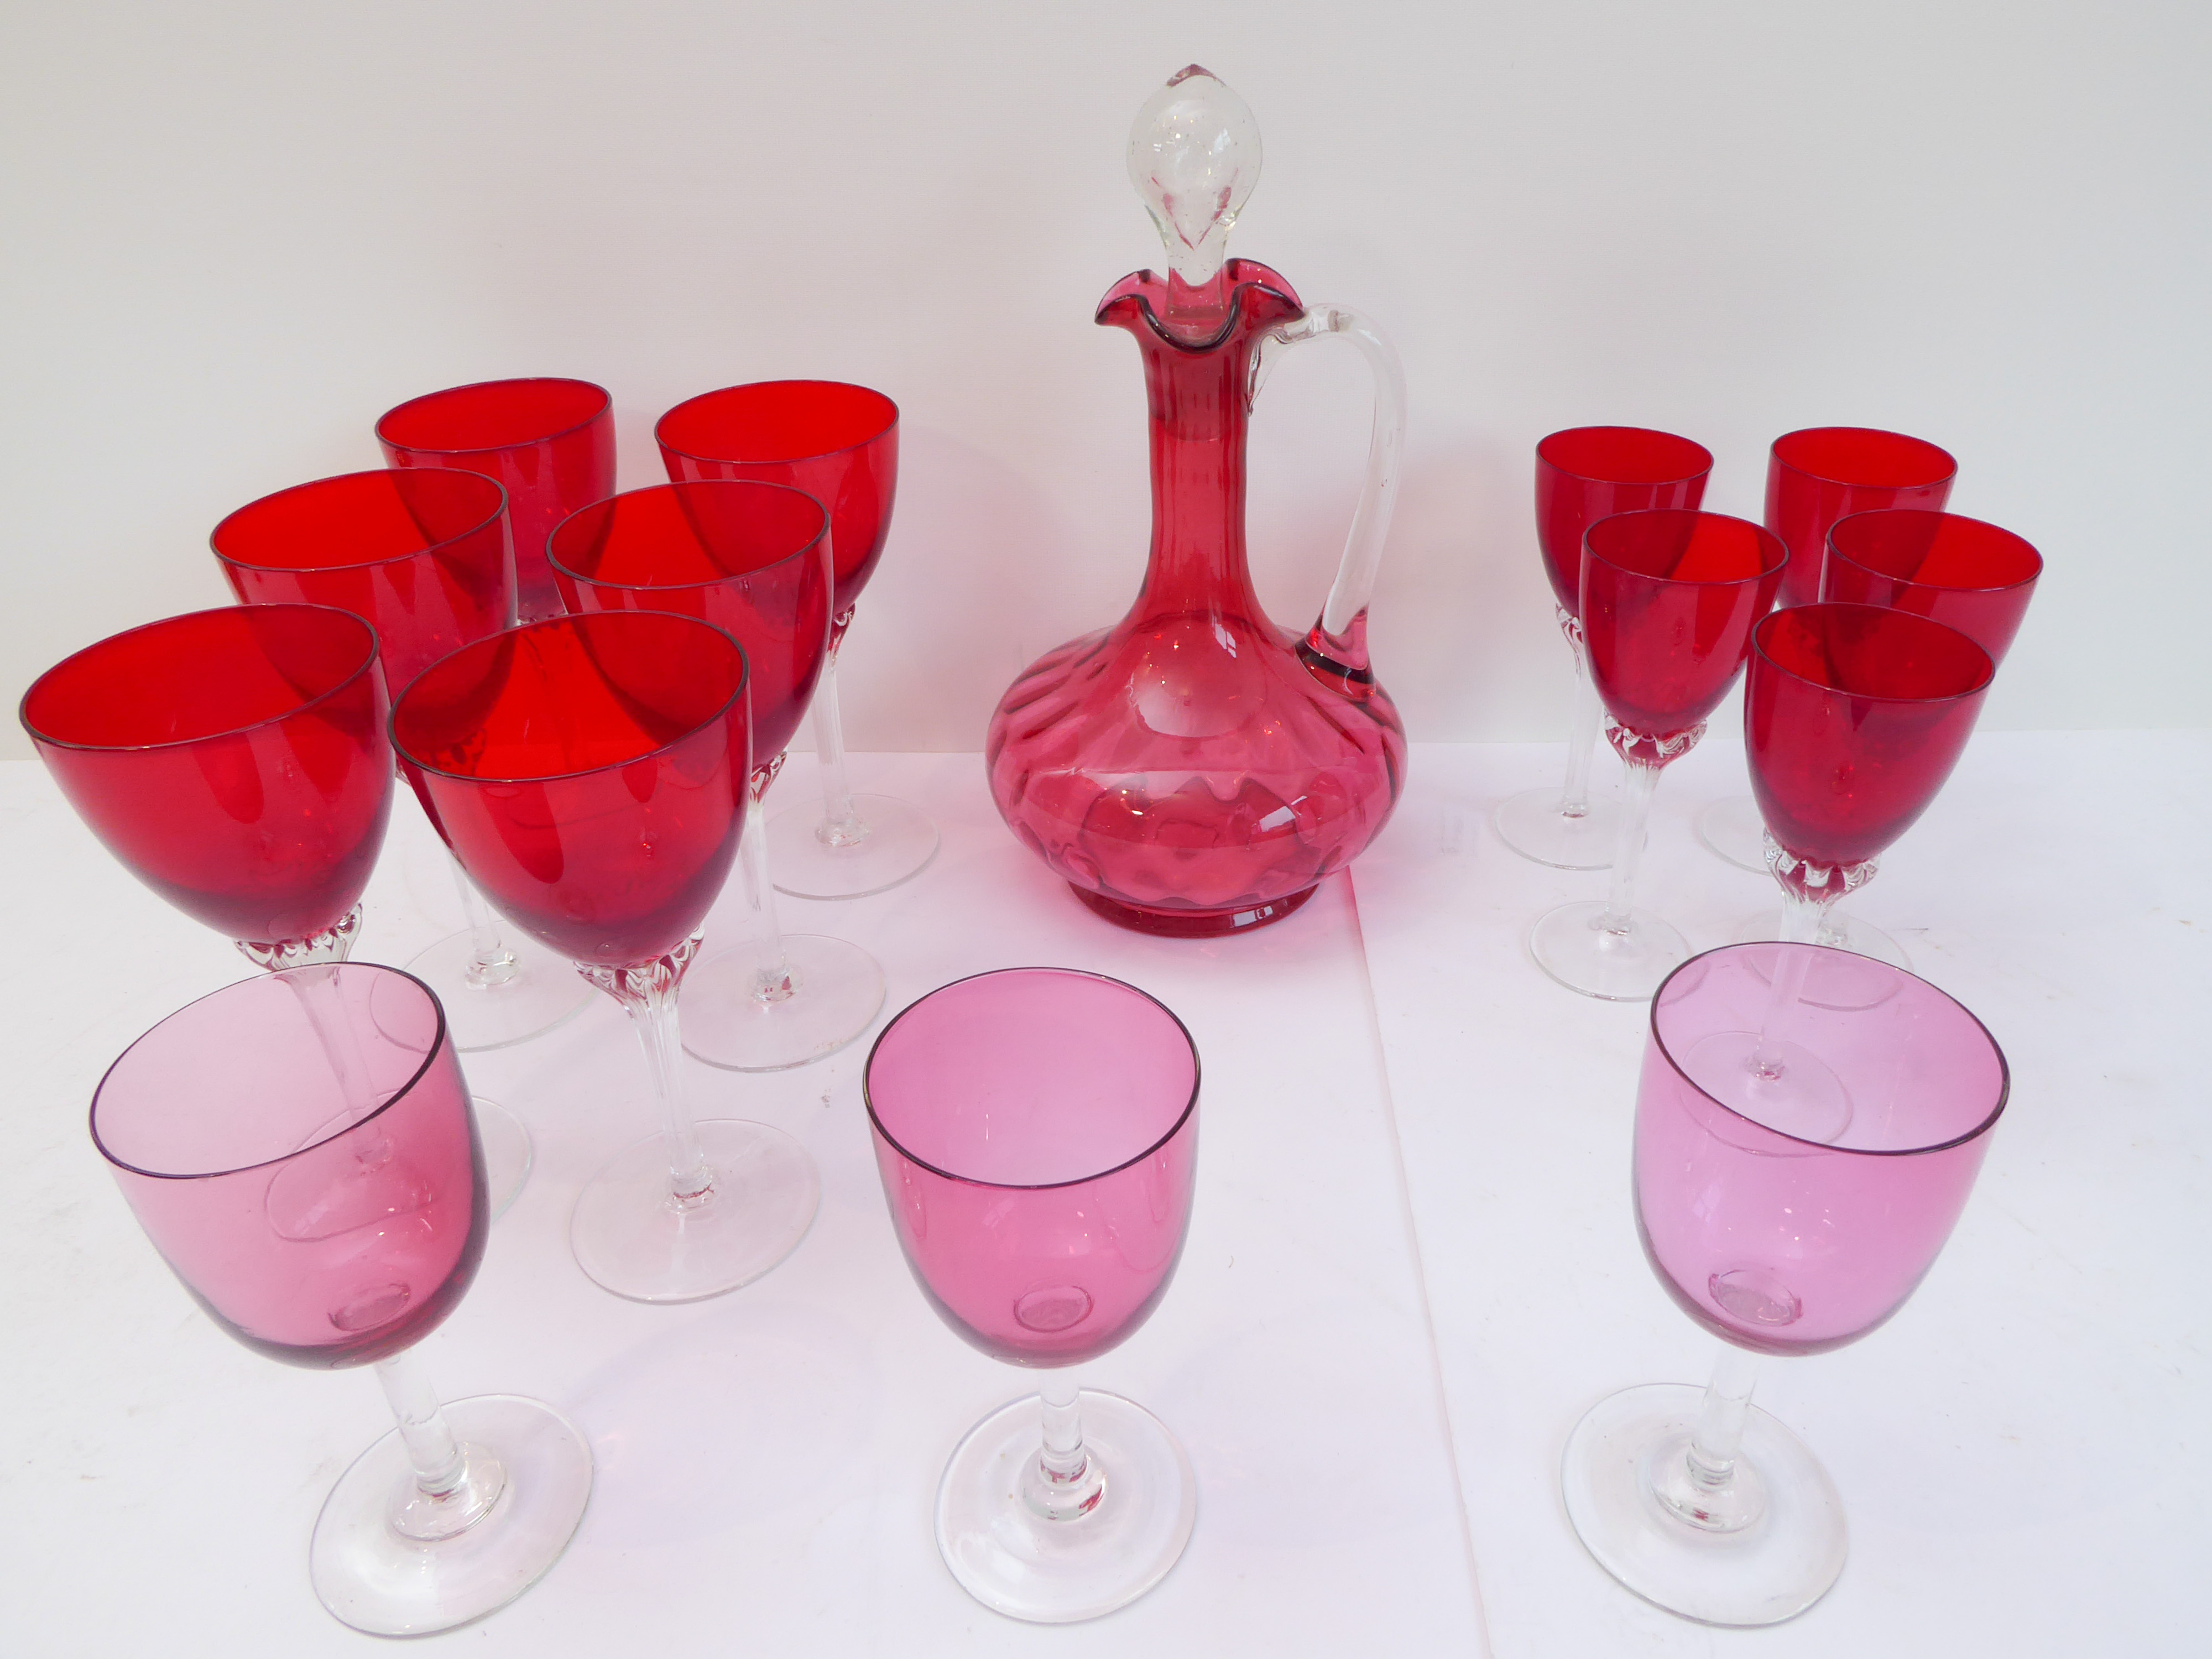 A 19th century cranberry glass globe-and-shaft style decanter, together with a set of six wines, a